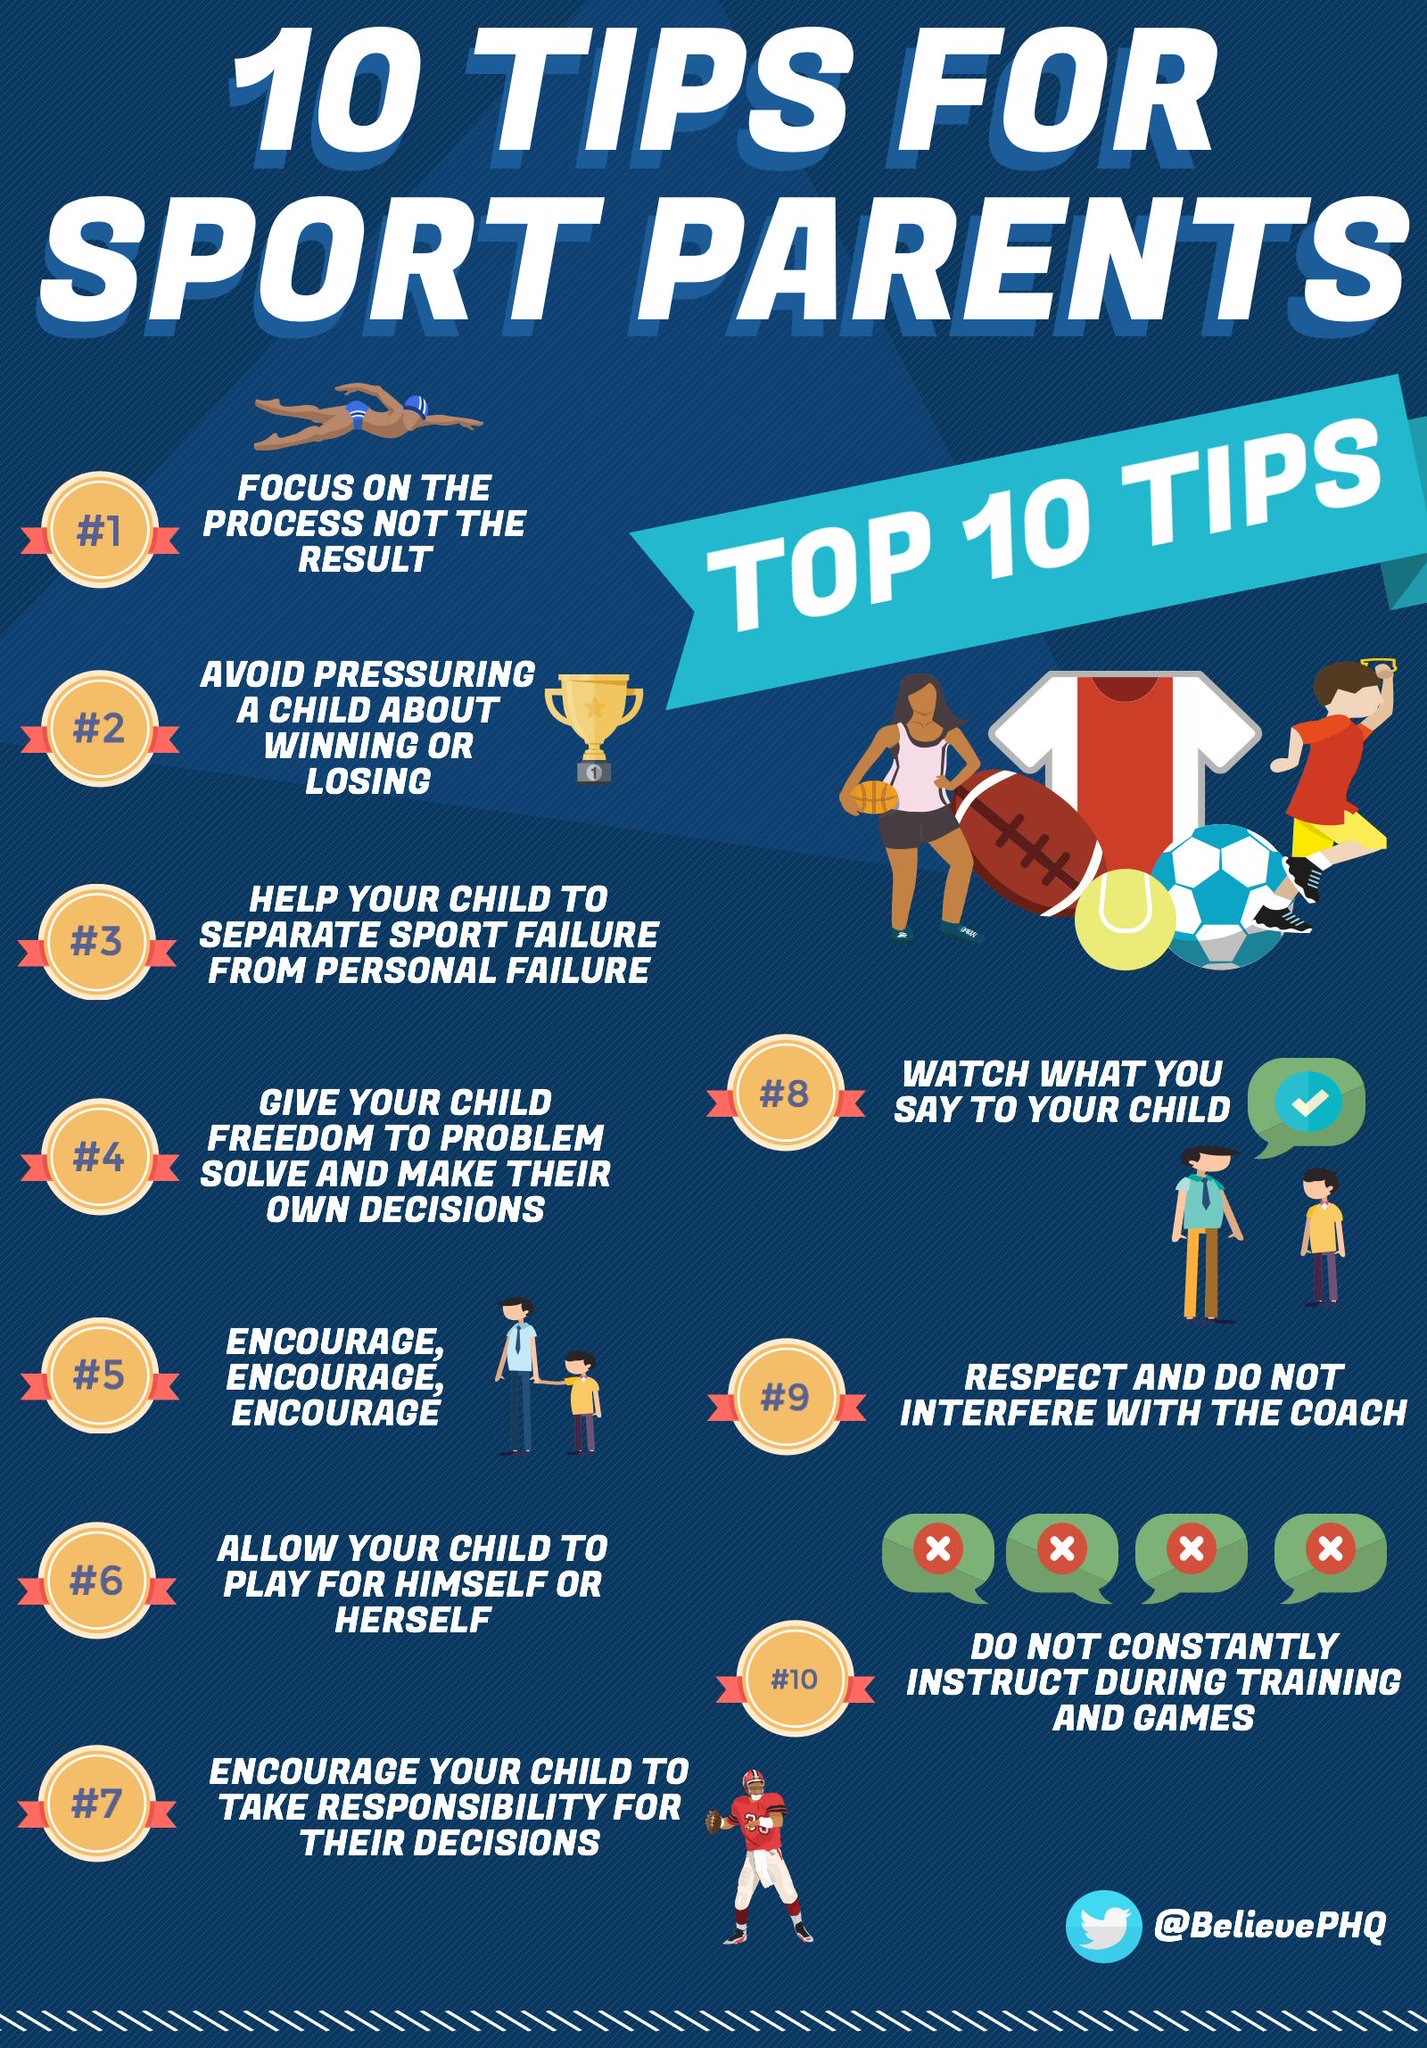 Tips for Sport Parents – 